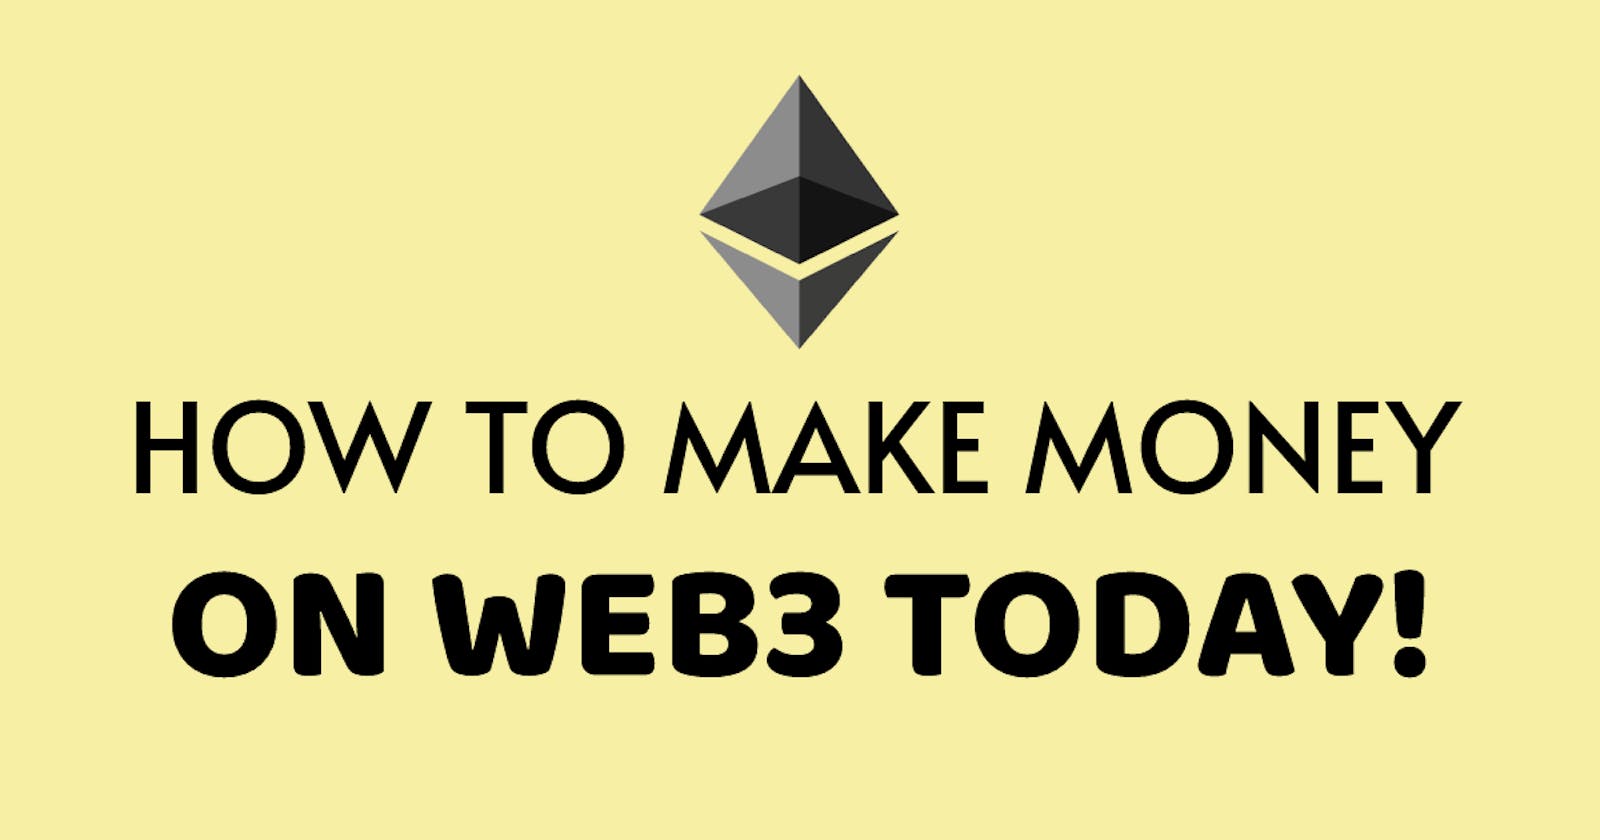 5 Simple Ways To Make Money On Web3 Today!